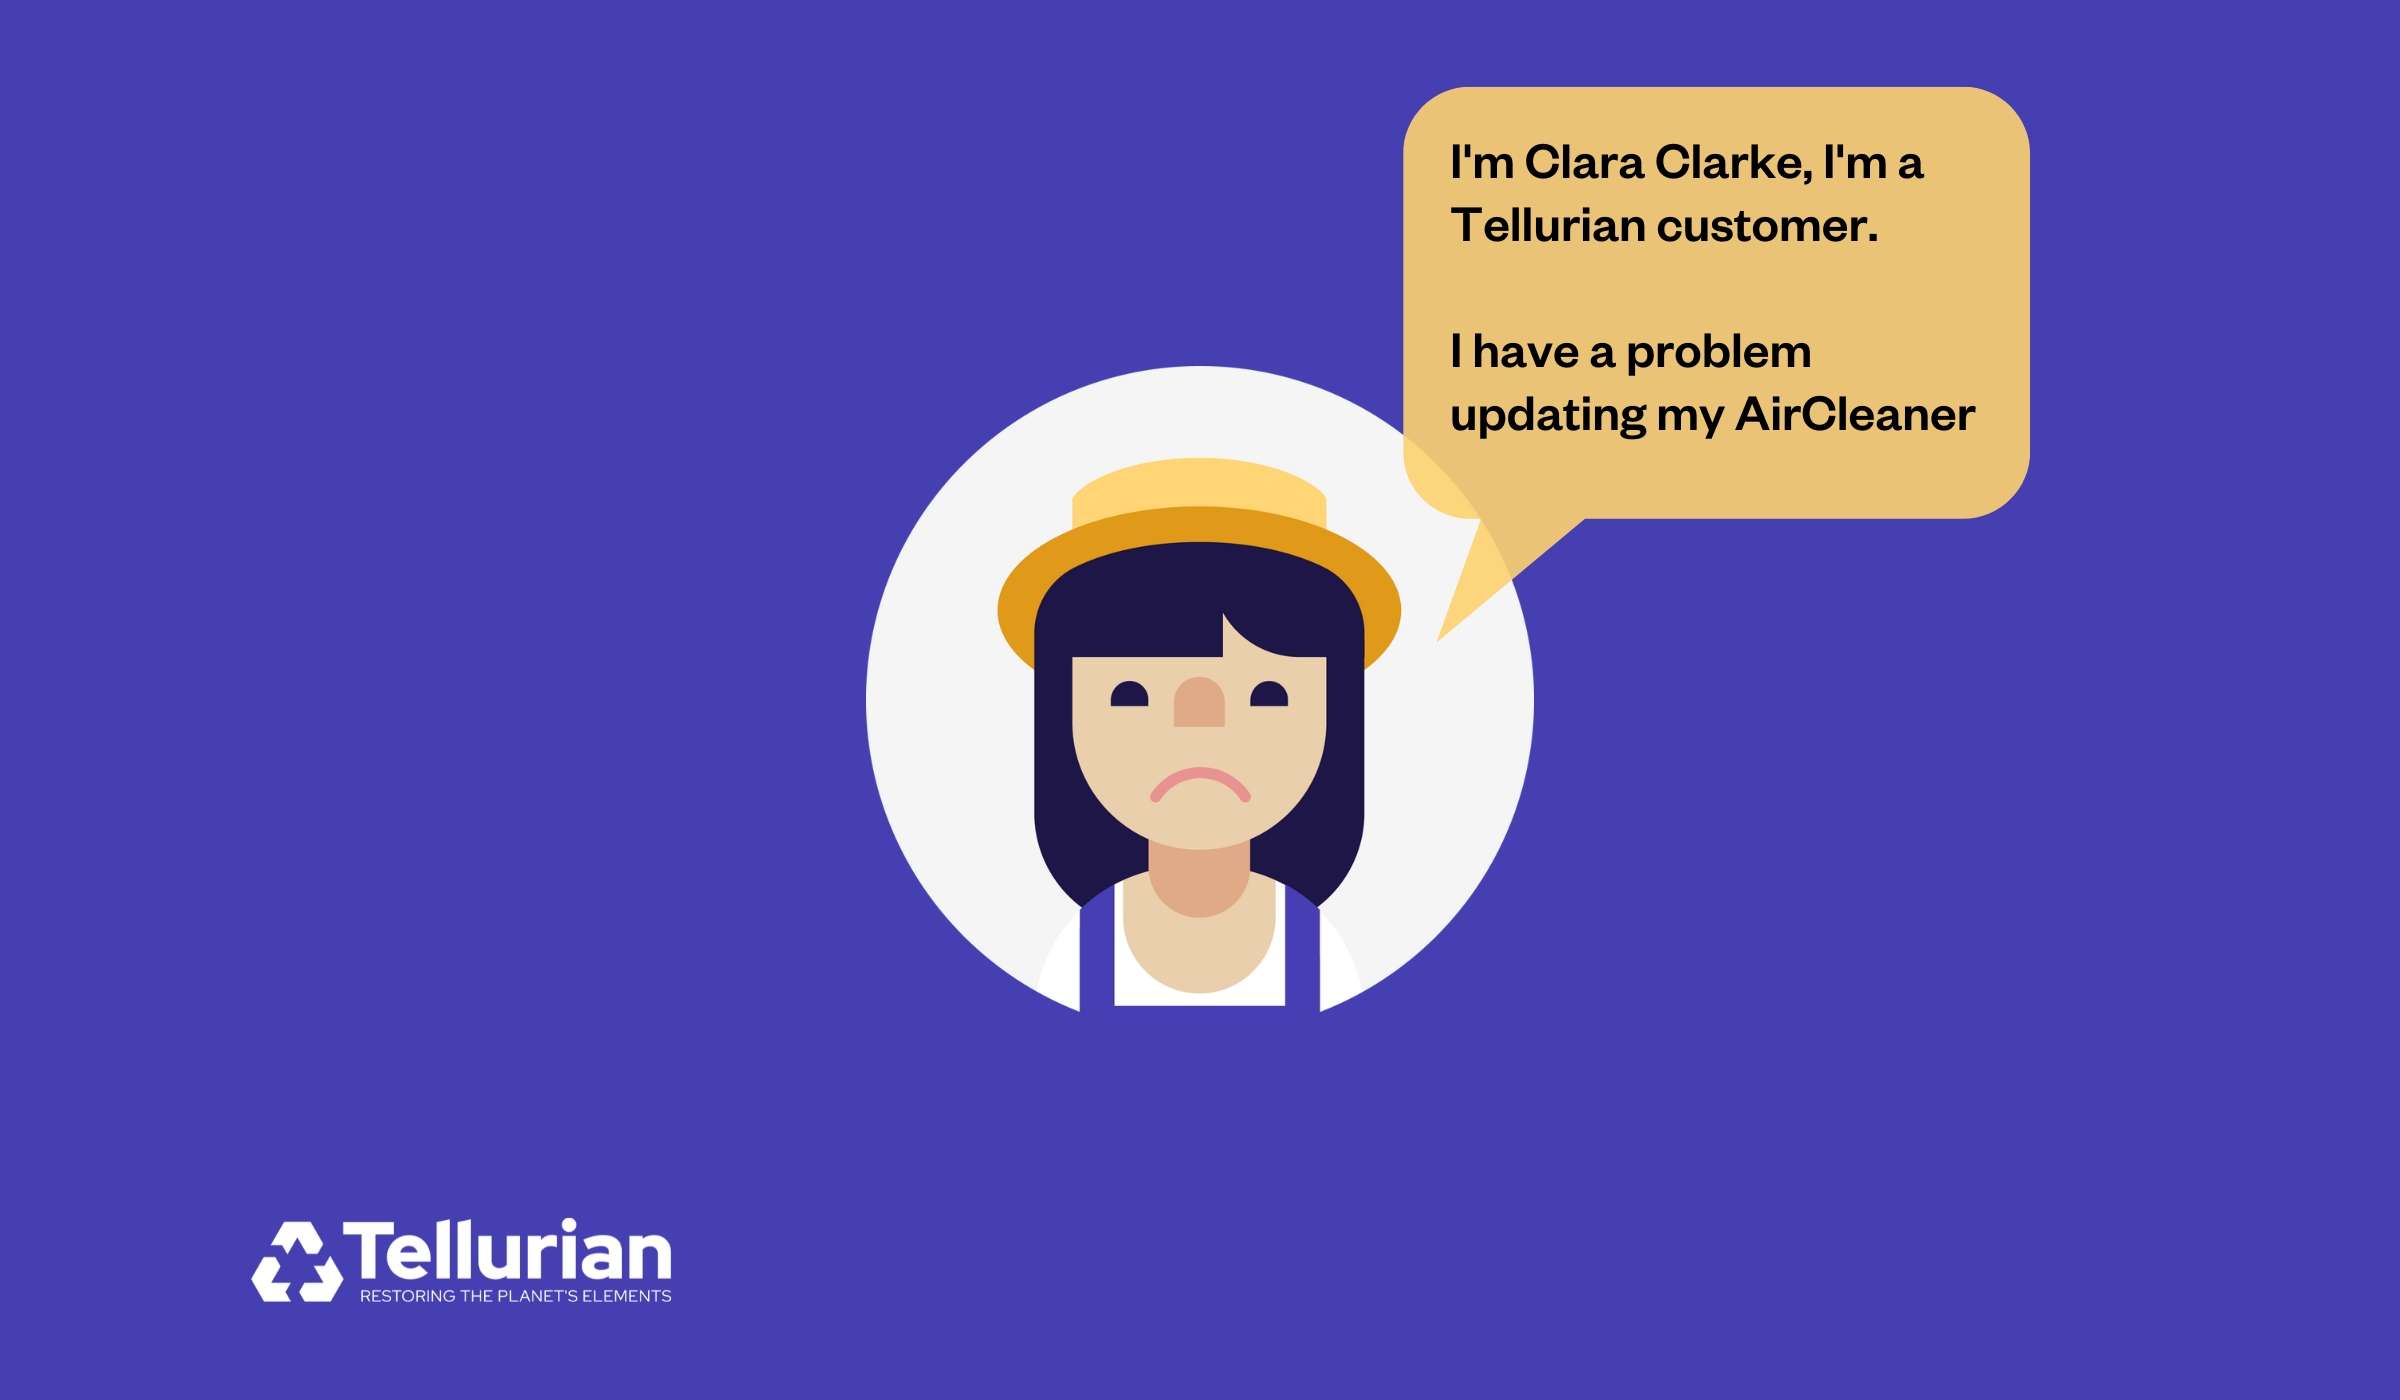 Meet Clara! Clara is a Tellurian customer and has a problem with her AirCleaner product. She will contact Tellurian Support Service by raising a ticket on the JSM portal: